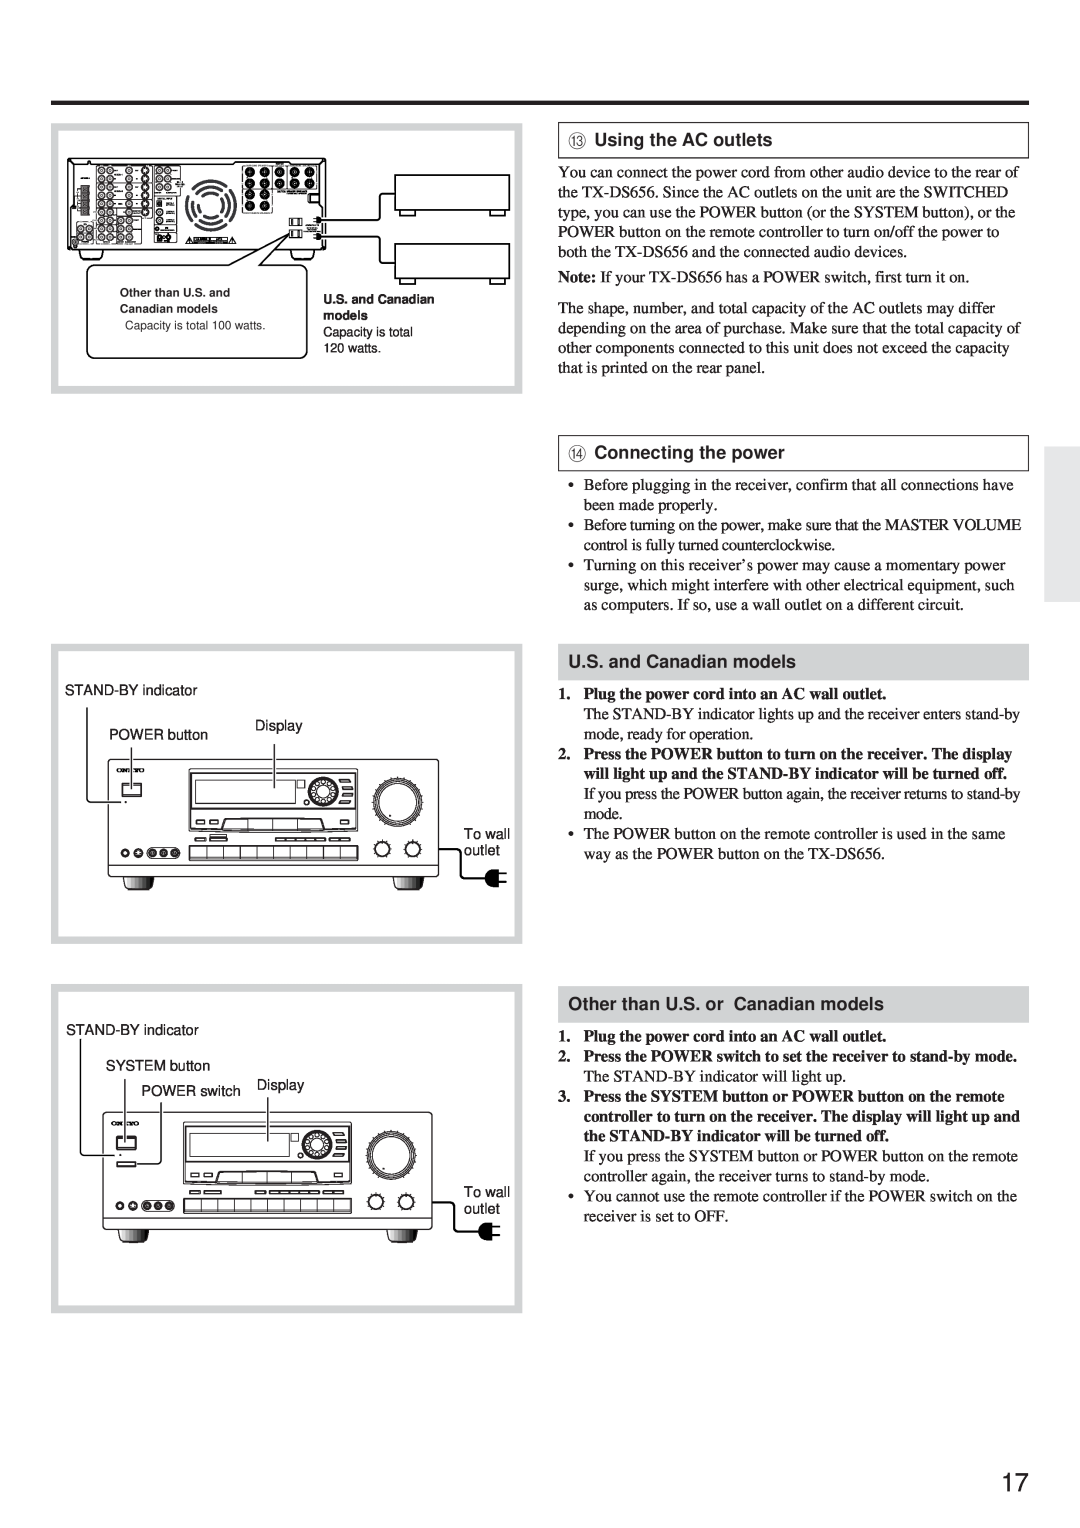 Onkyo TX-DS656 CUsing the AC outlets, DConnecting the power, U.S. and Canadian models, Other than U.S. or Canadian models 